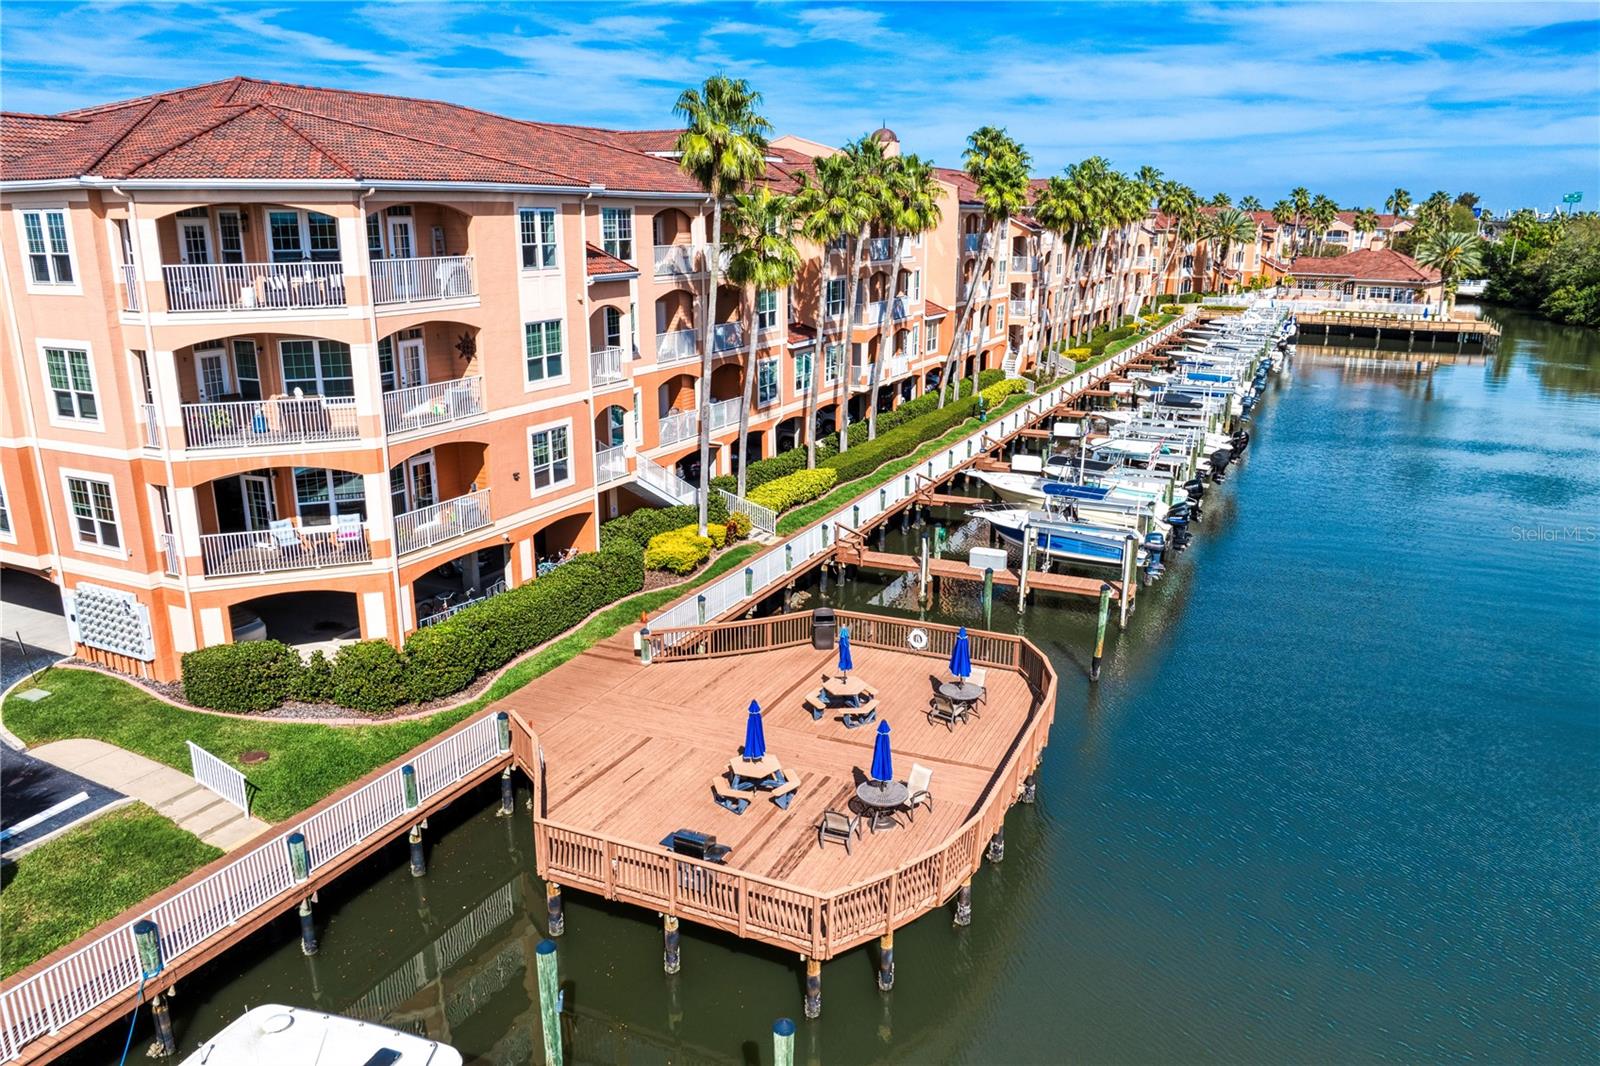 Culbreath Key features a dockside gathering space to enjoy the peacefulness of this beautiful community.